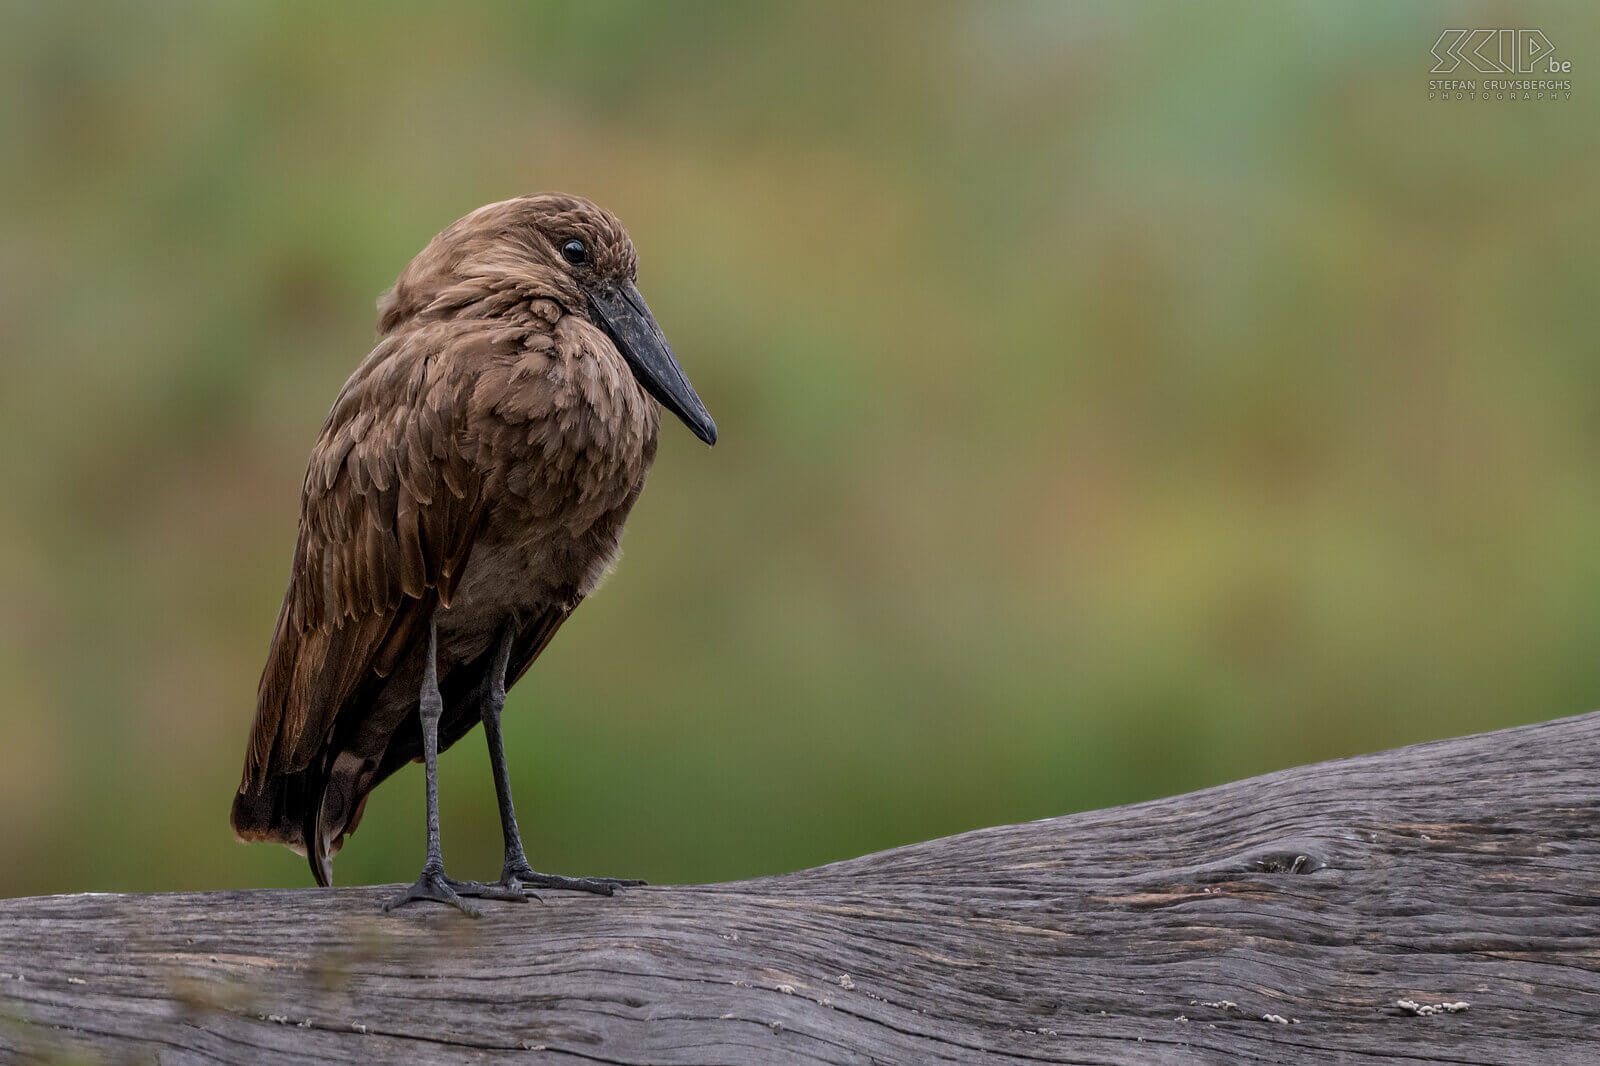 Lake Naivasha - Hamerkop The hamerkop  is a common medium-sized brown African water bird. They have a characteristic head that resembles a hammer when the bird extends its neck. The hamerkop is best known for its gigantic nests that can grow up to 1.5 meters in size.  Stefan Cruysberghs